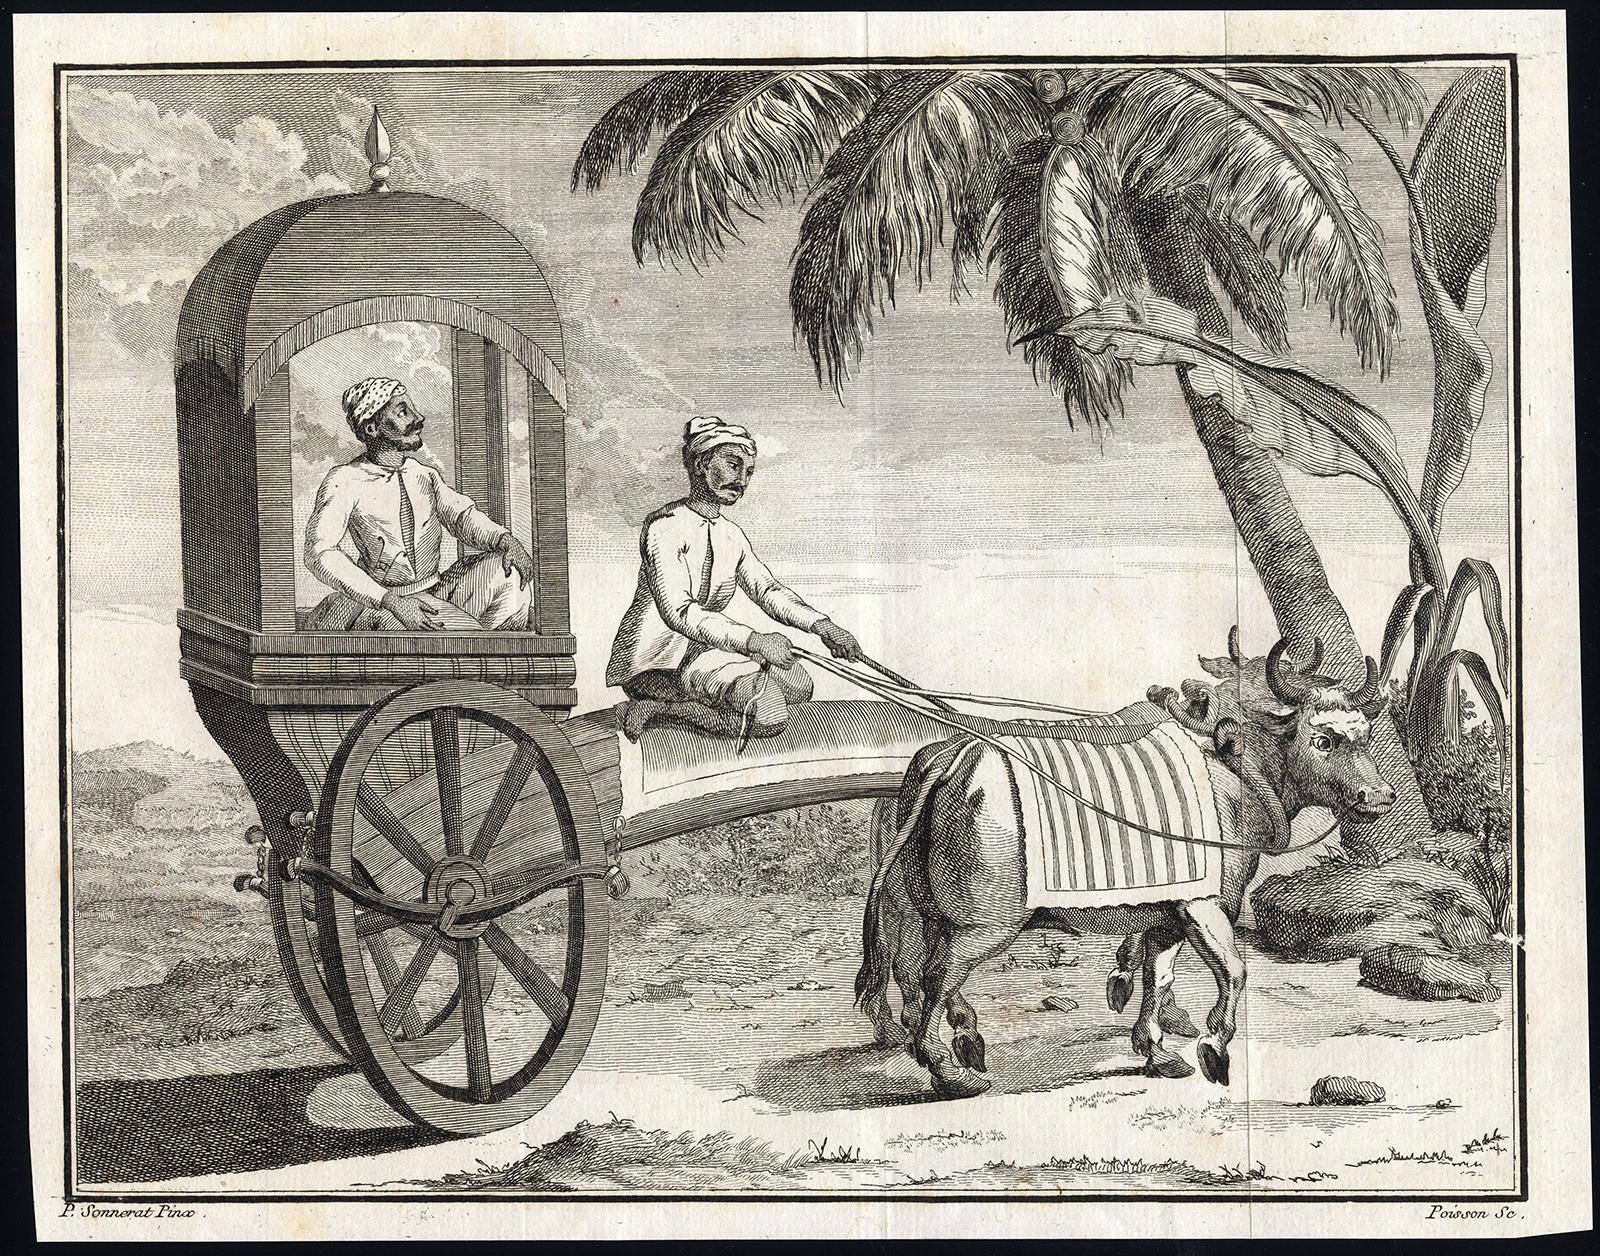 Untitled print of an oriental man, possible an Indian, in a small carriage pulled by oxen. This print originates from: 'Voyage aux Indes Orientales et a la Chine (..)', by Pierre Sonnerat, published in Paris in 1782. 

Artists and Engravers: